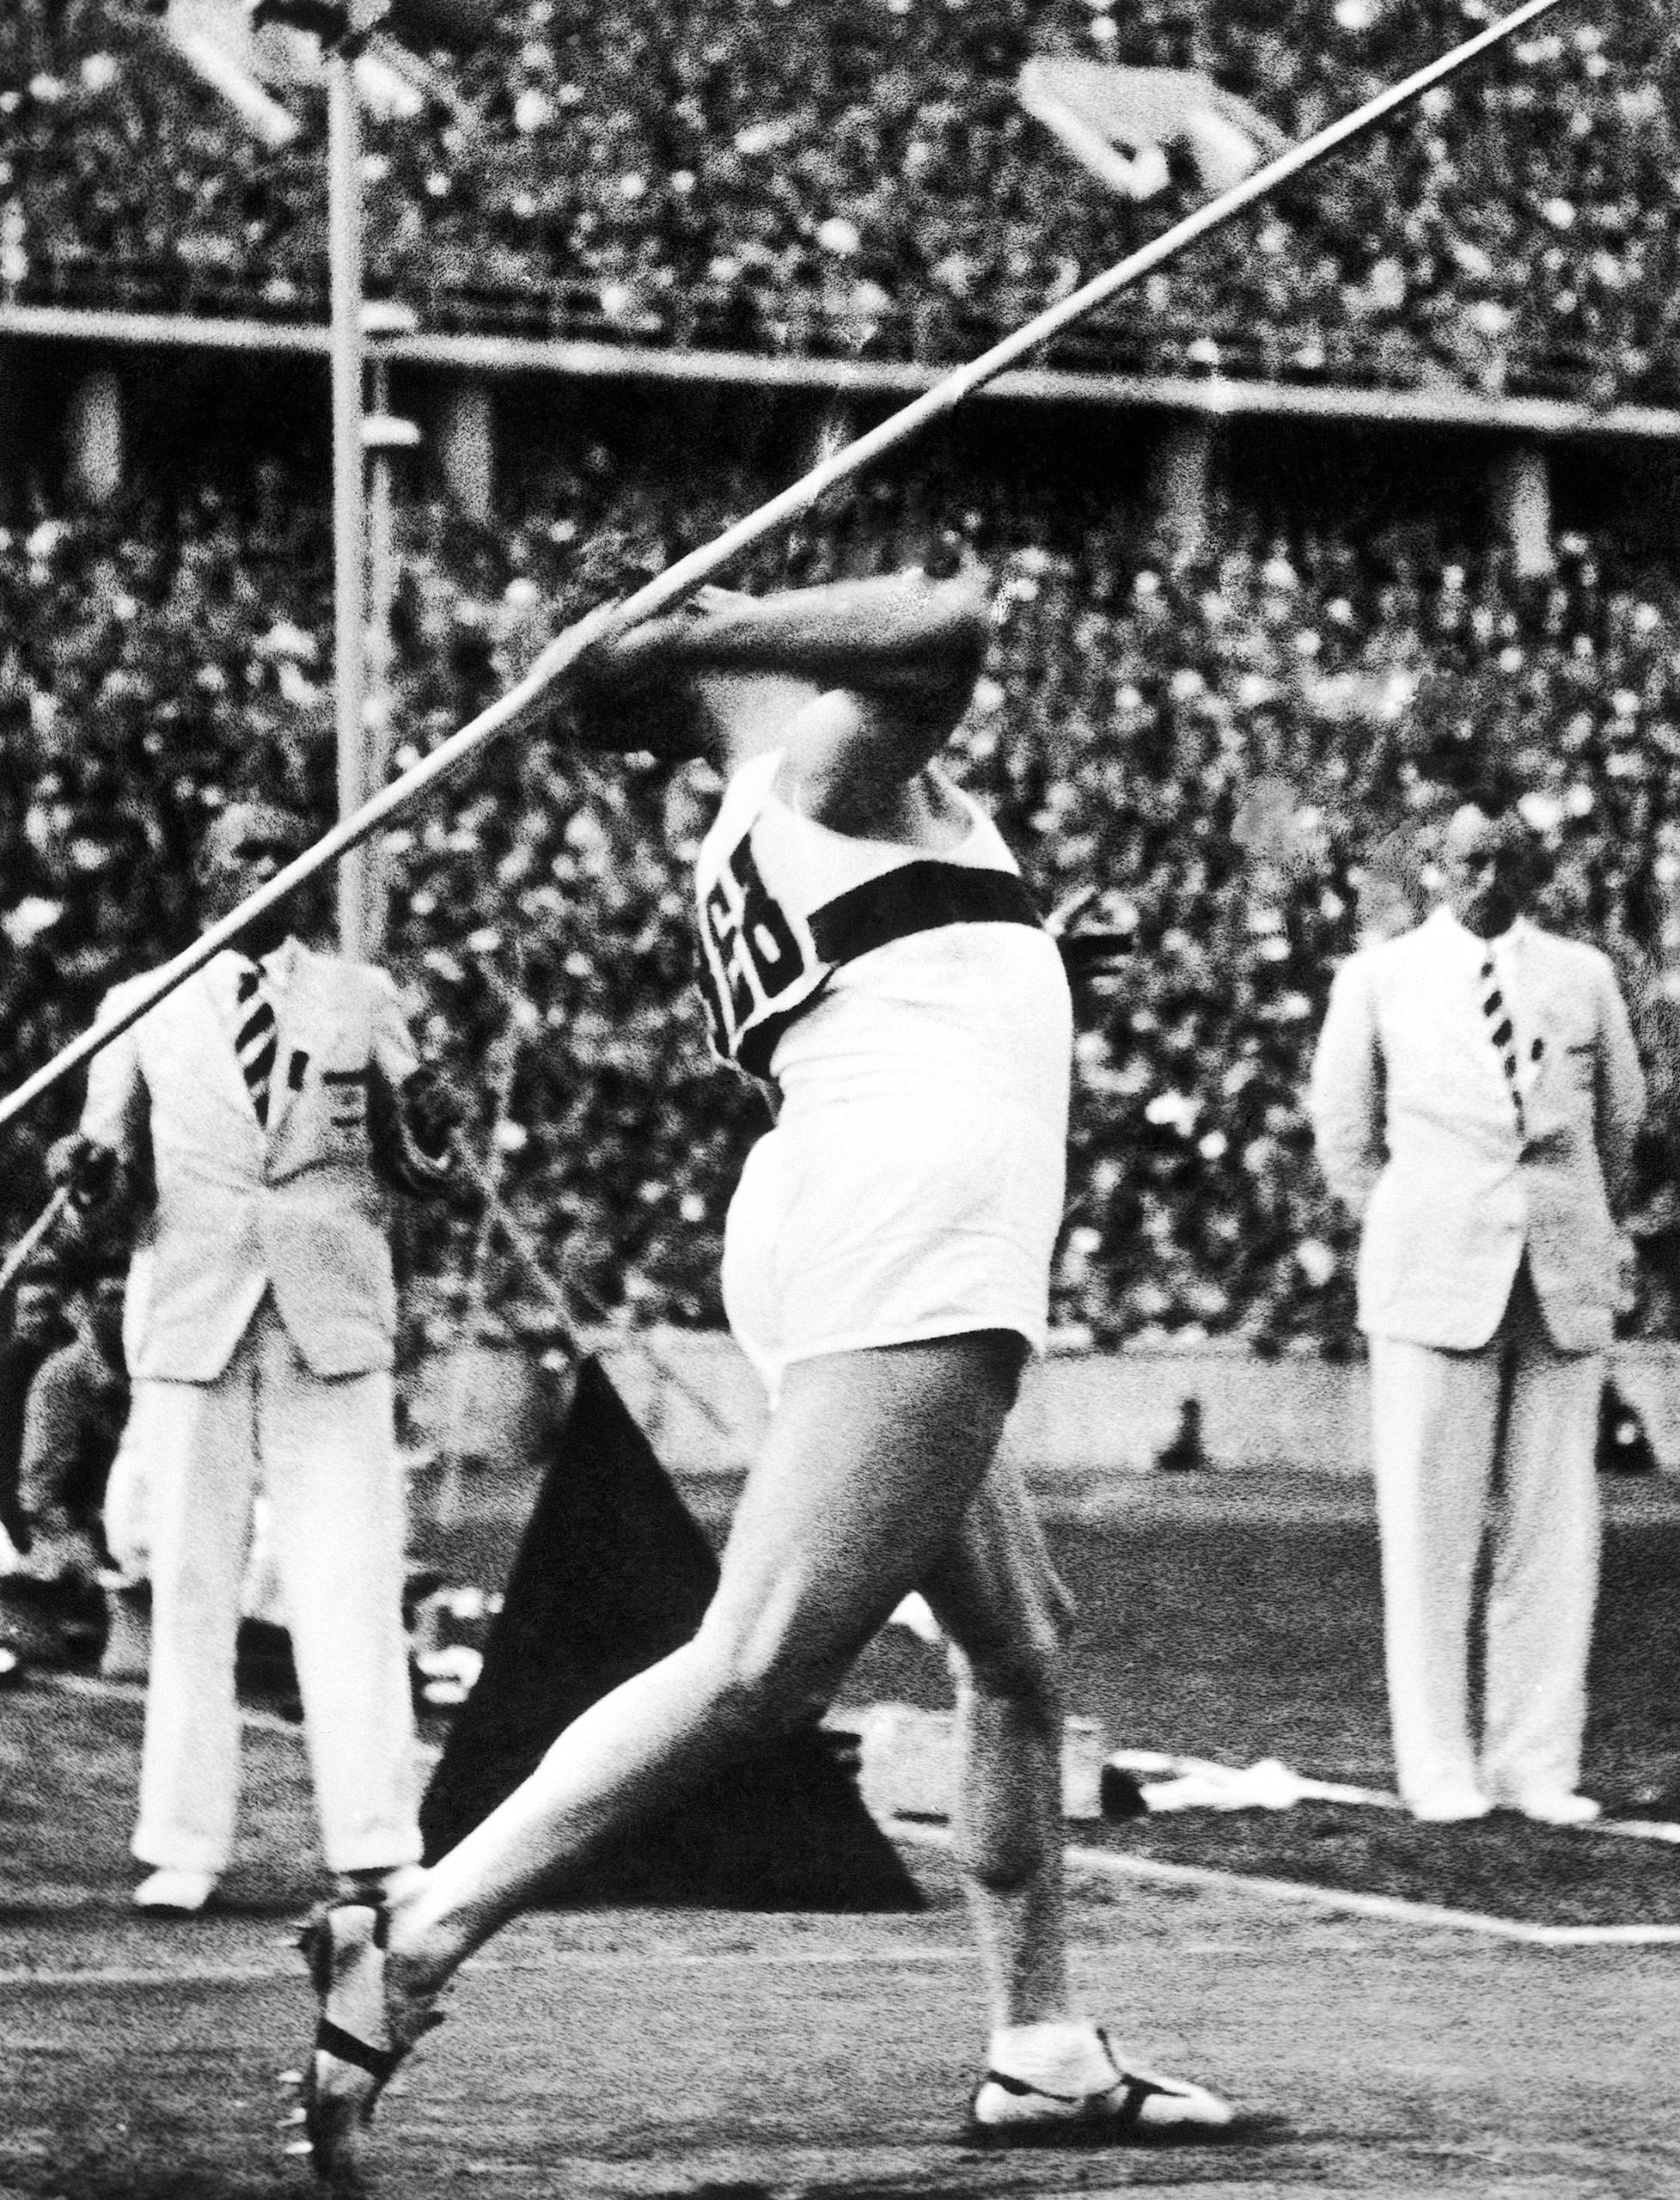 Winner of the men's javelin throw event at the Summer Olympic Games, German athlete Gerhard Stoeck in action on August 6, 1936 in Berlin, Germany.